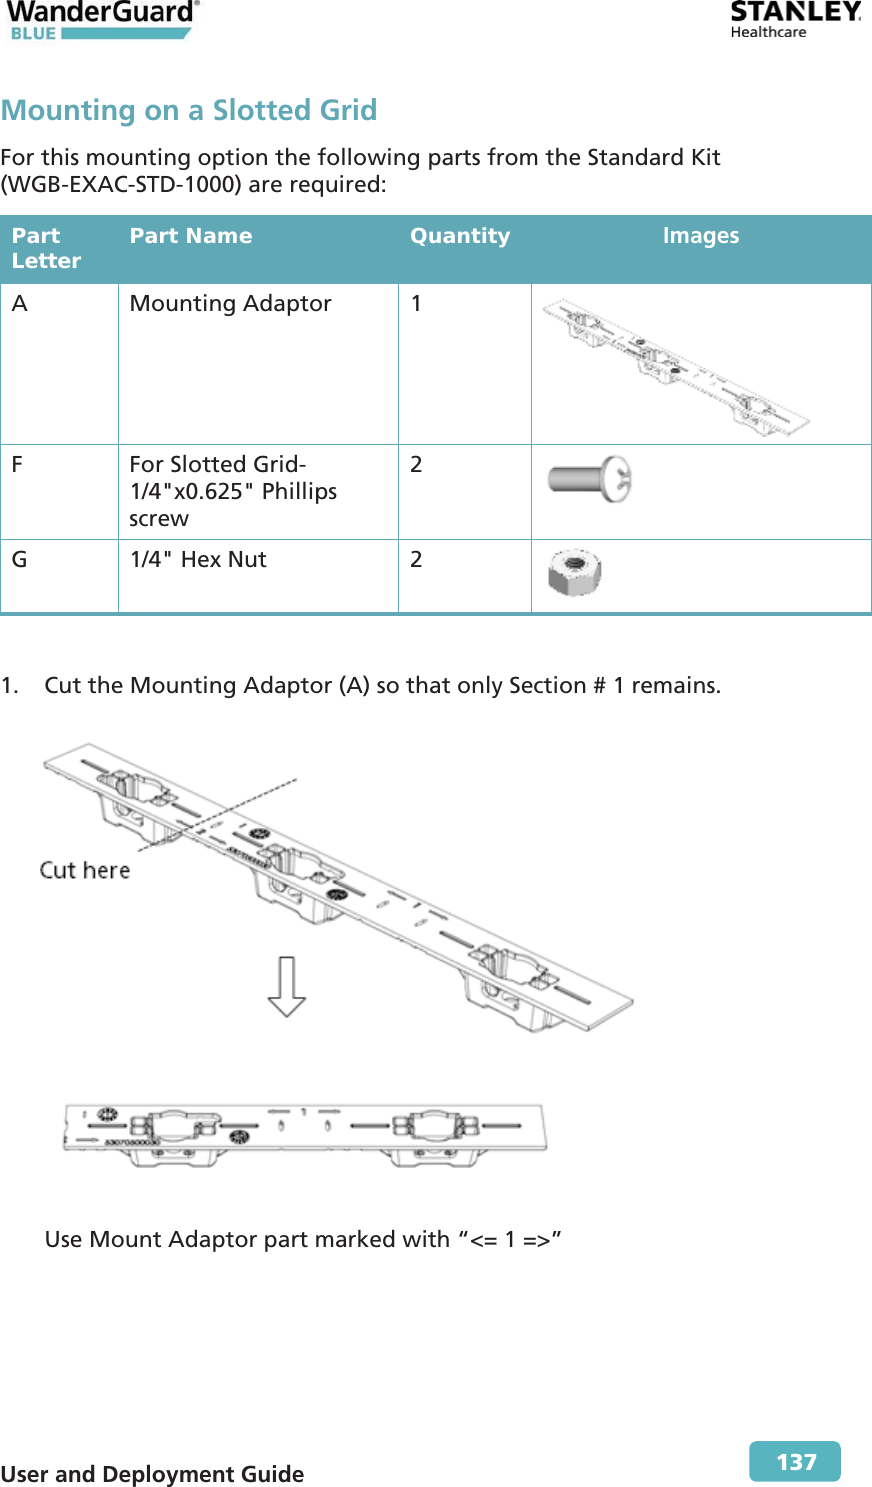  User and Deployment Guide        137 Mounting on a Slotted Grid For this mounting option the following parts from the Standard Kit (WGB-EXAC-STD-1000) are required: Part Letter  Part Name  Quantity  Images A Mounting Adaptor 1  F  For Slotted Grid-1/4&quot;x0.625&quot; Phillips screw 2  G  1/4&quot; Hex Nut  2   1. Cut the Mounting Adaptor (A) so that only Section # 1 remains.  Use Mount Adaptor part marked with “&lt;= 1 =&gt;” 